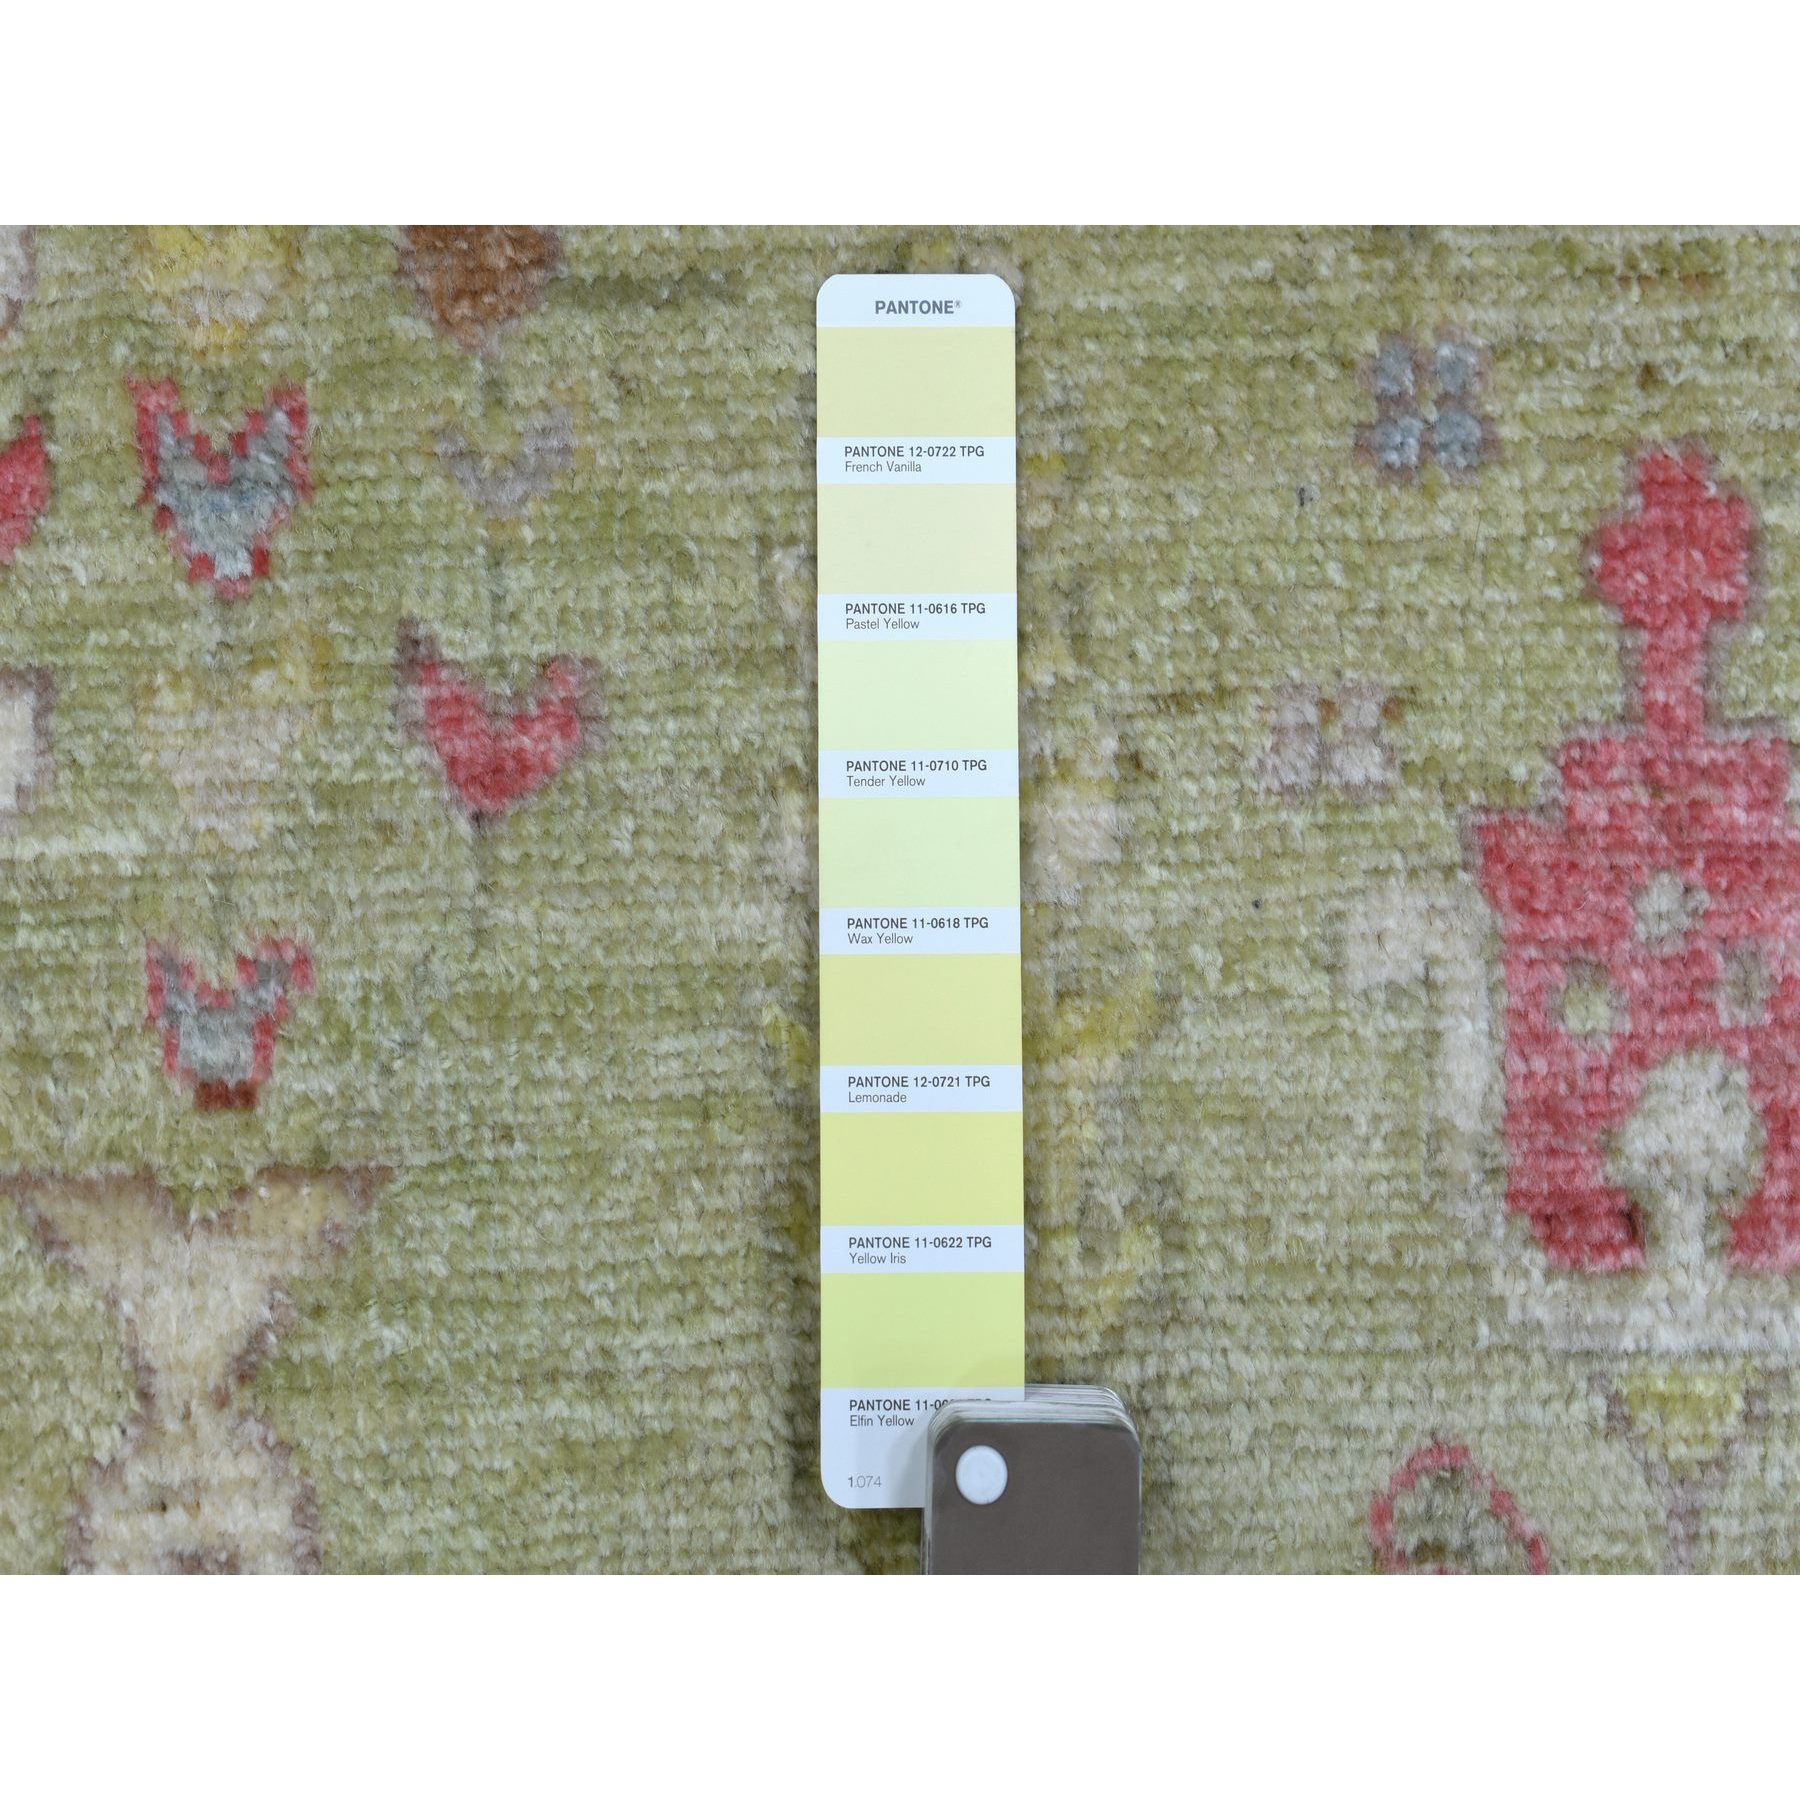 6'2"x9' Soft Wool Hand Woven Lime Green Angora Oushak with Colorful Cypress and Willow Tree Design Oriental Rug 